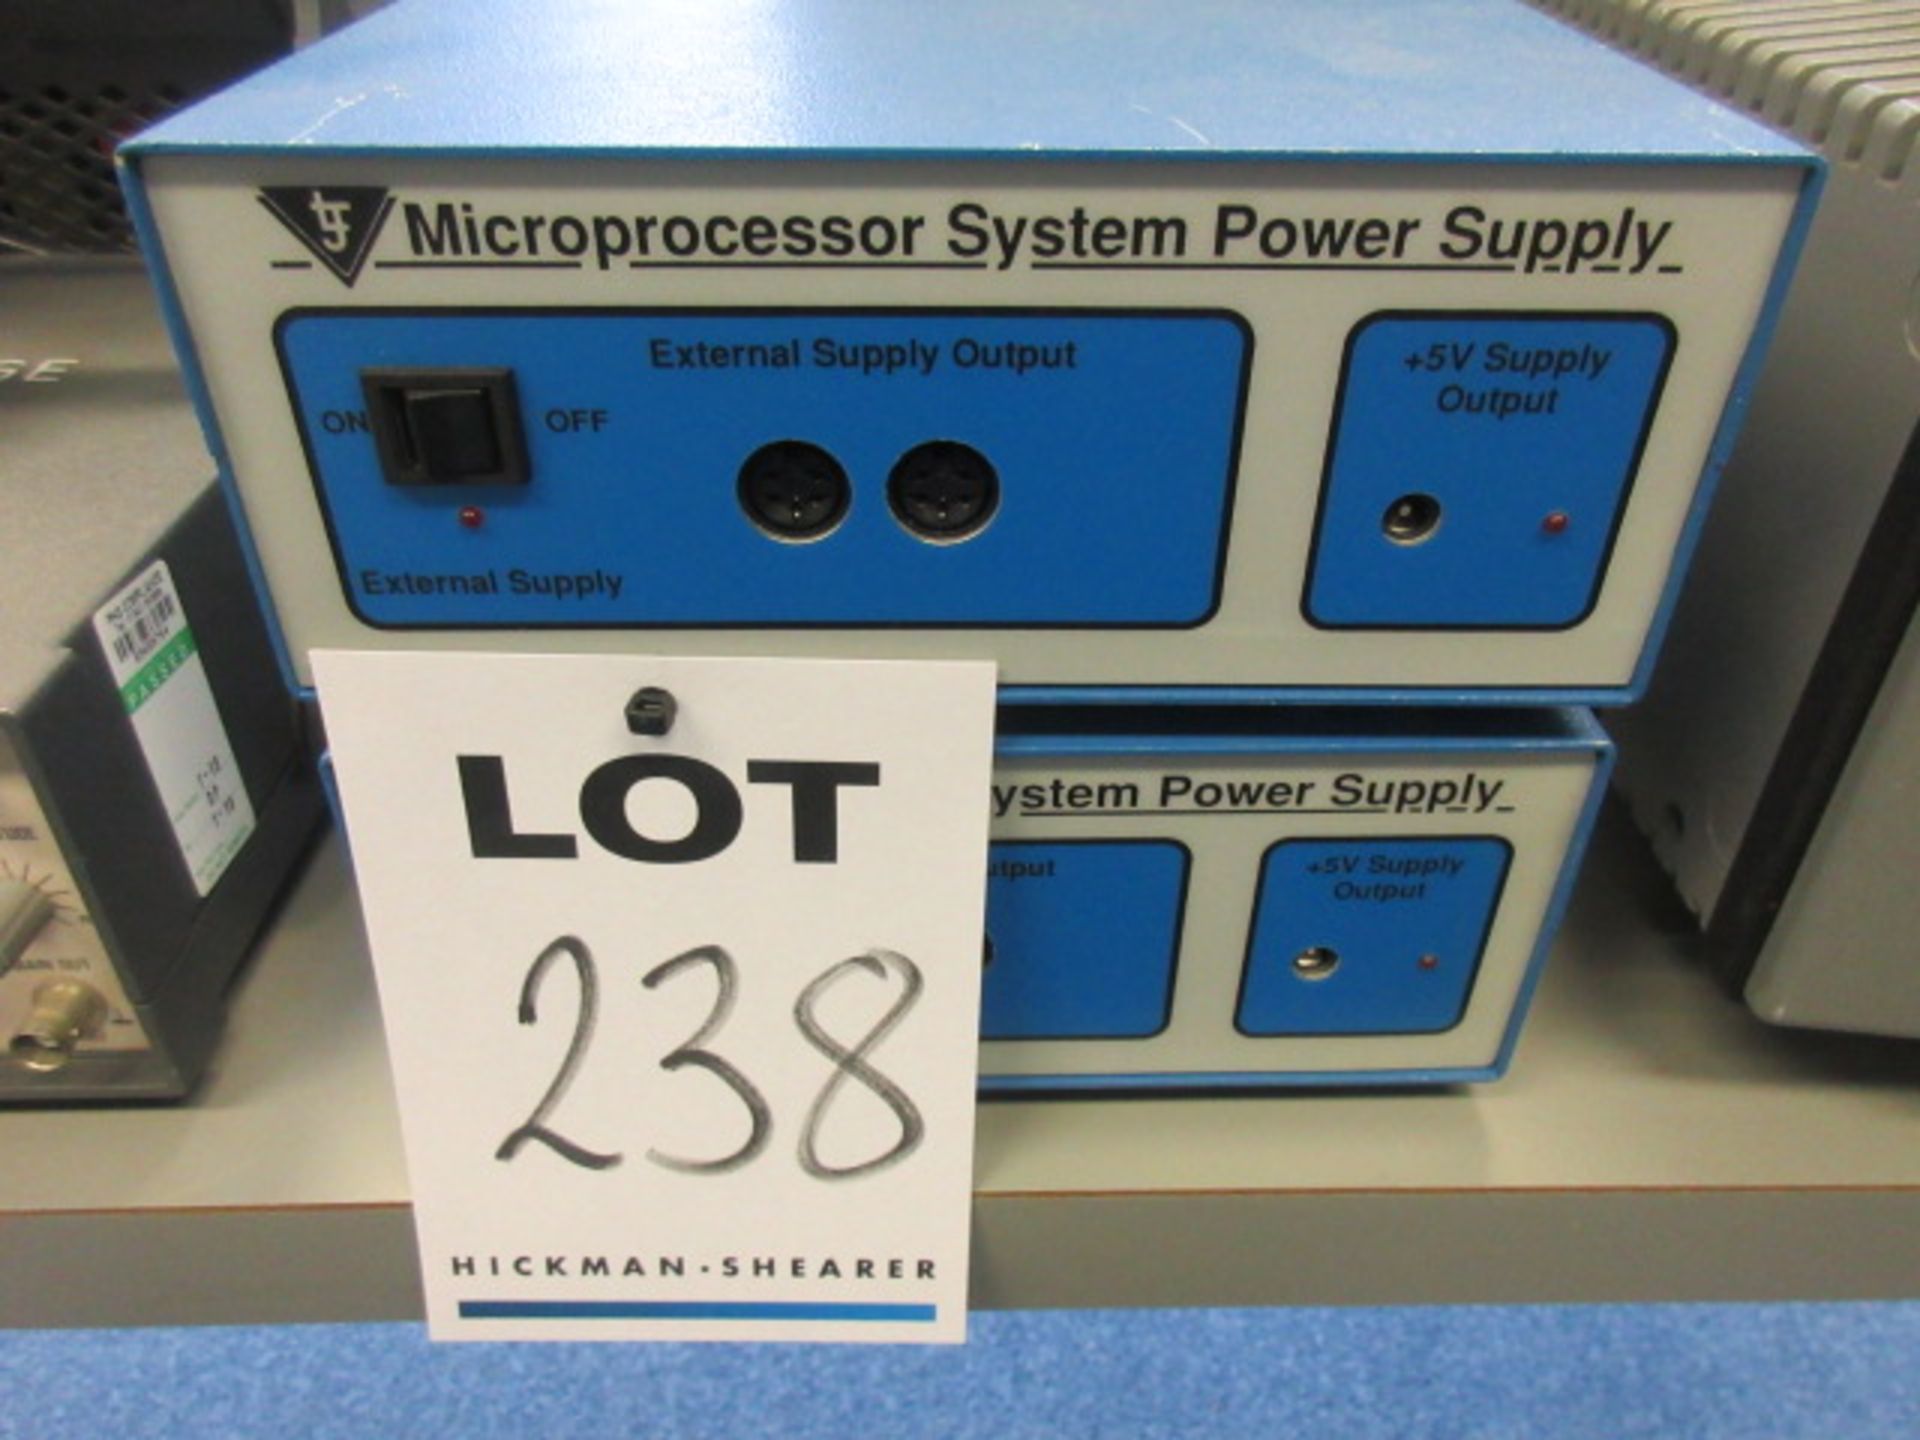 TWO MICROPROCESSOR SYSTEM POWER SUPPLYS - Image 2 of 2